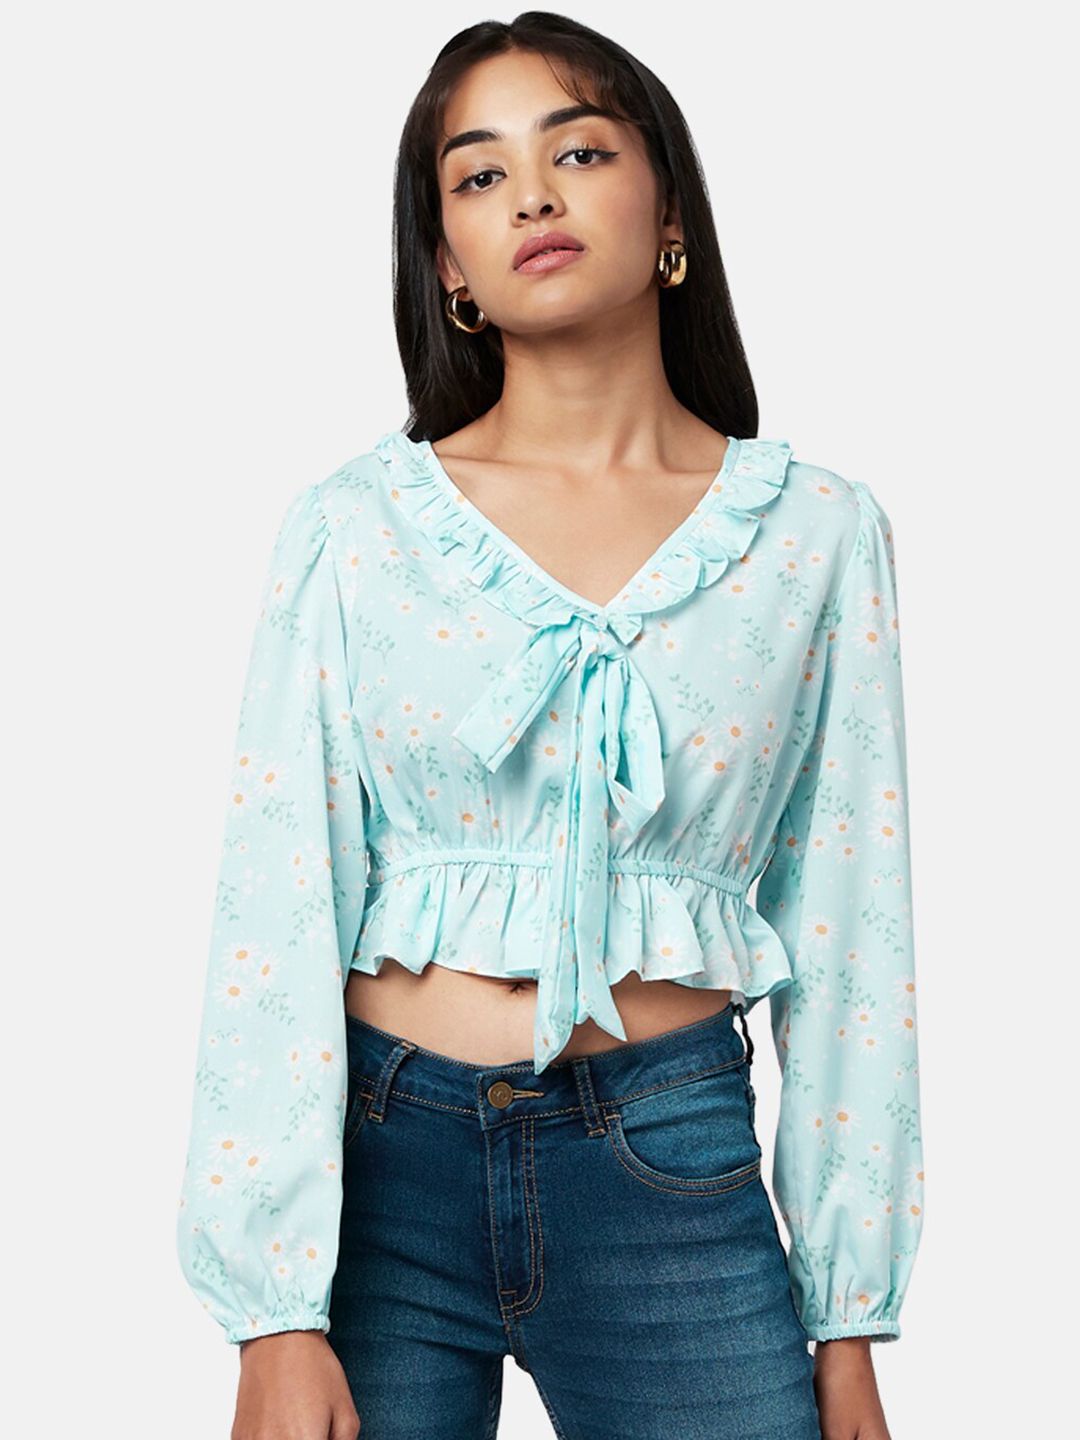 YU by Pantaloons Blue Floral Print Ruffles Cinched Waist Crop Top Price in India